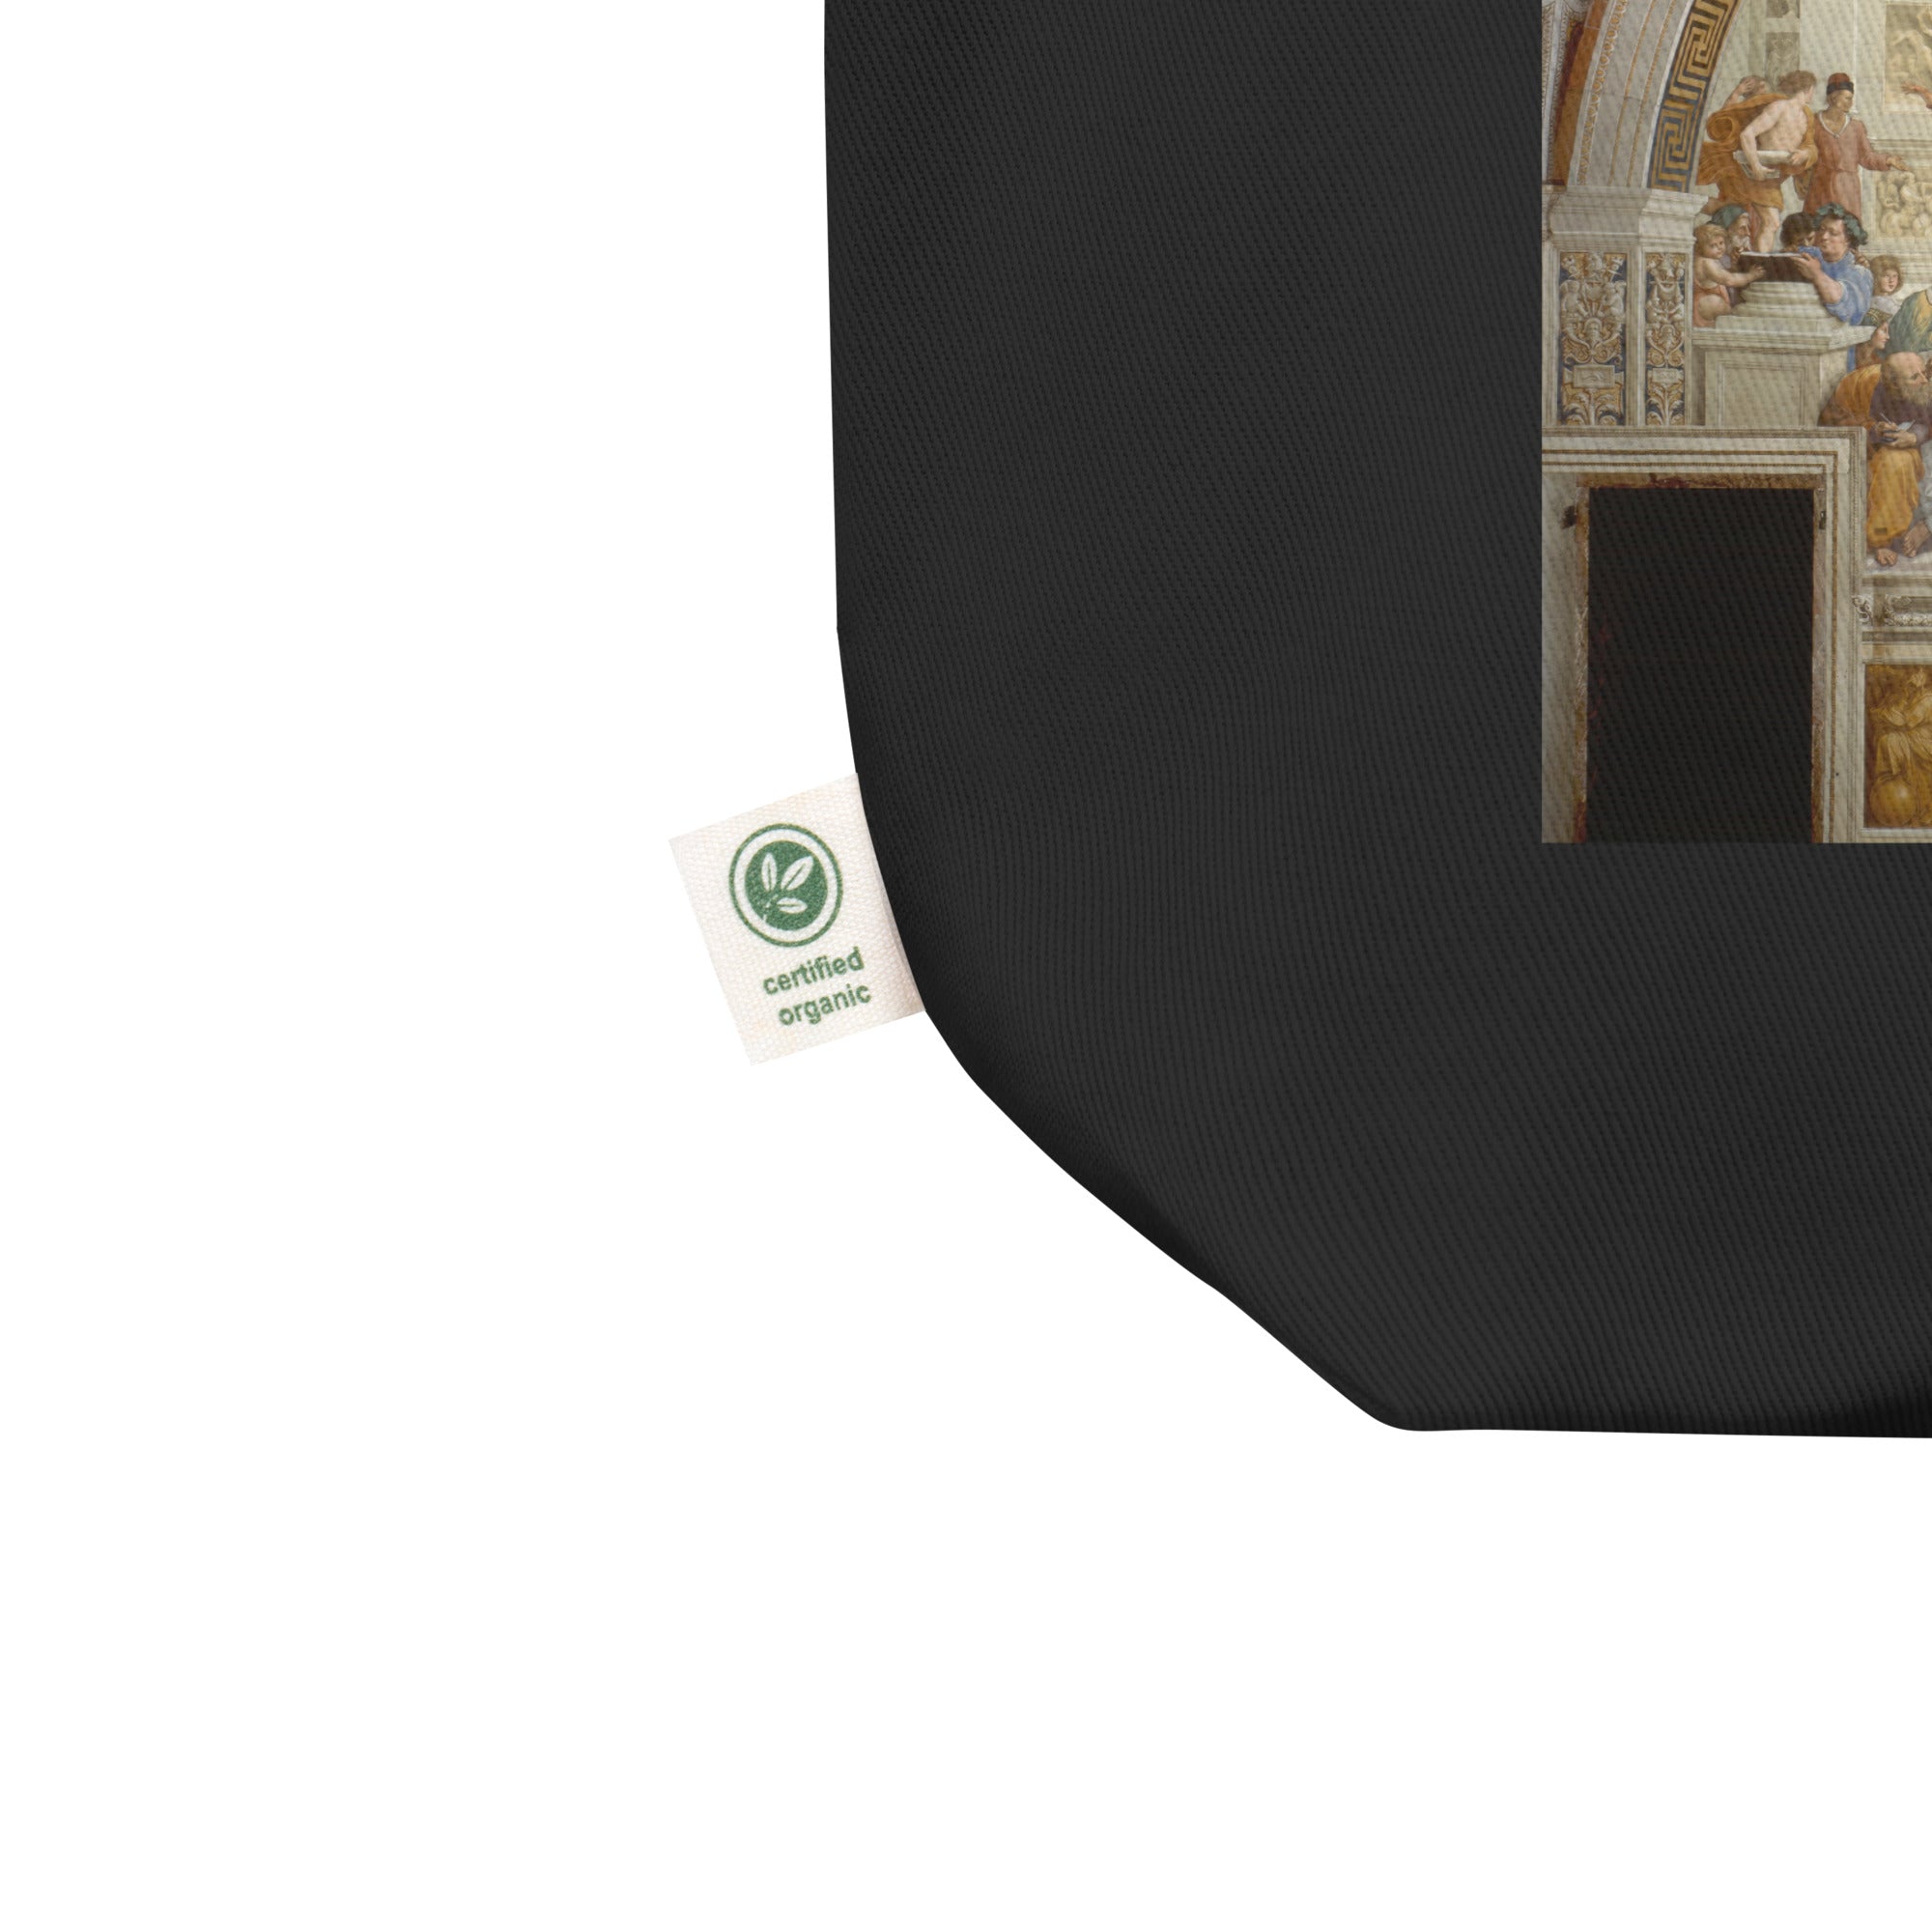 Raphael 'The School of Athens' Famous Painting Totebag | Eco Friendly Art Tote Bag